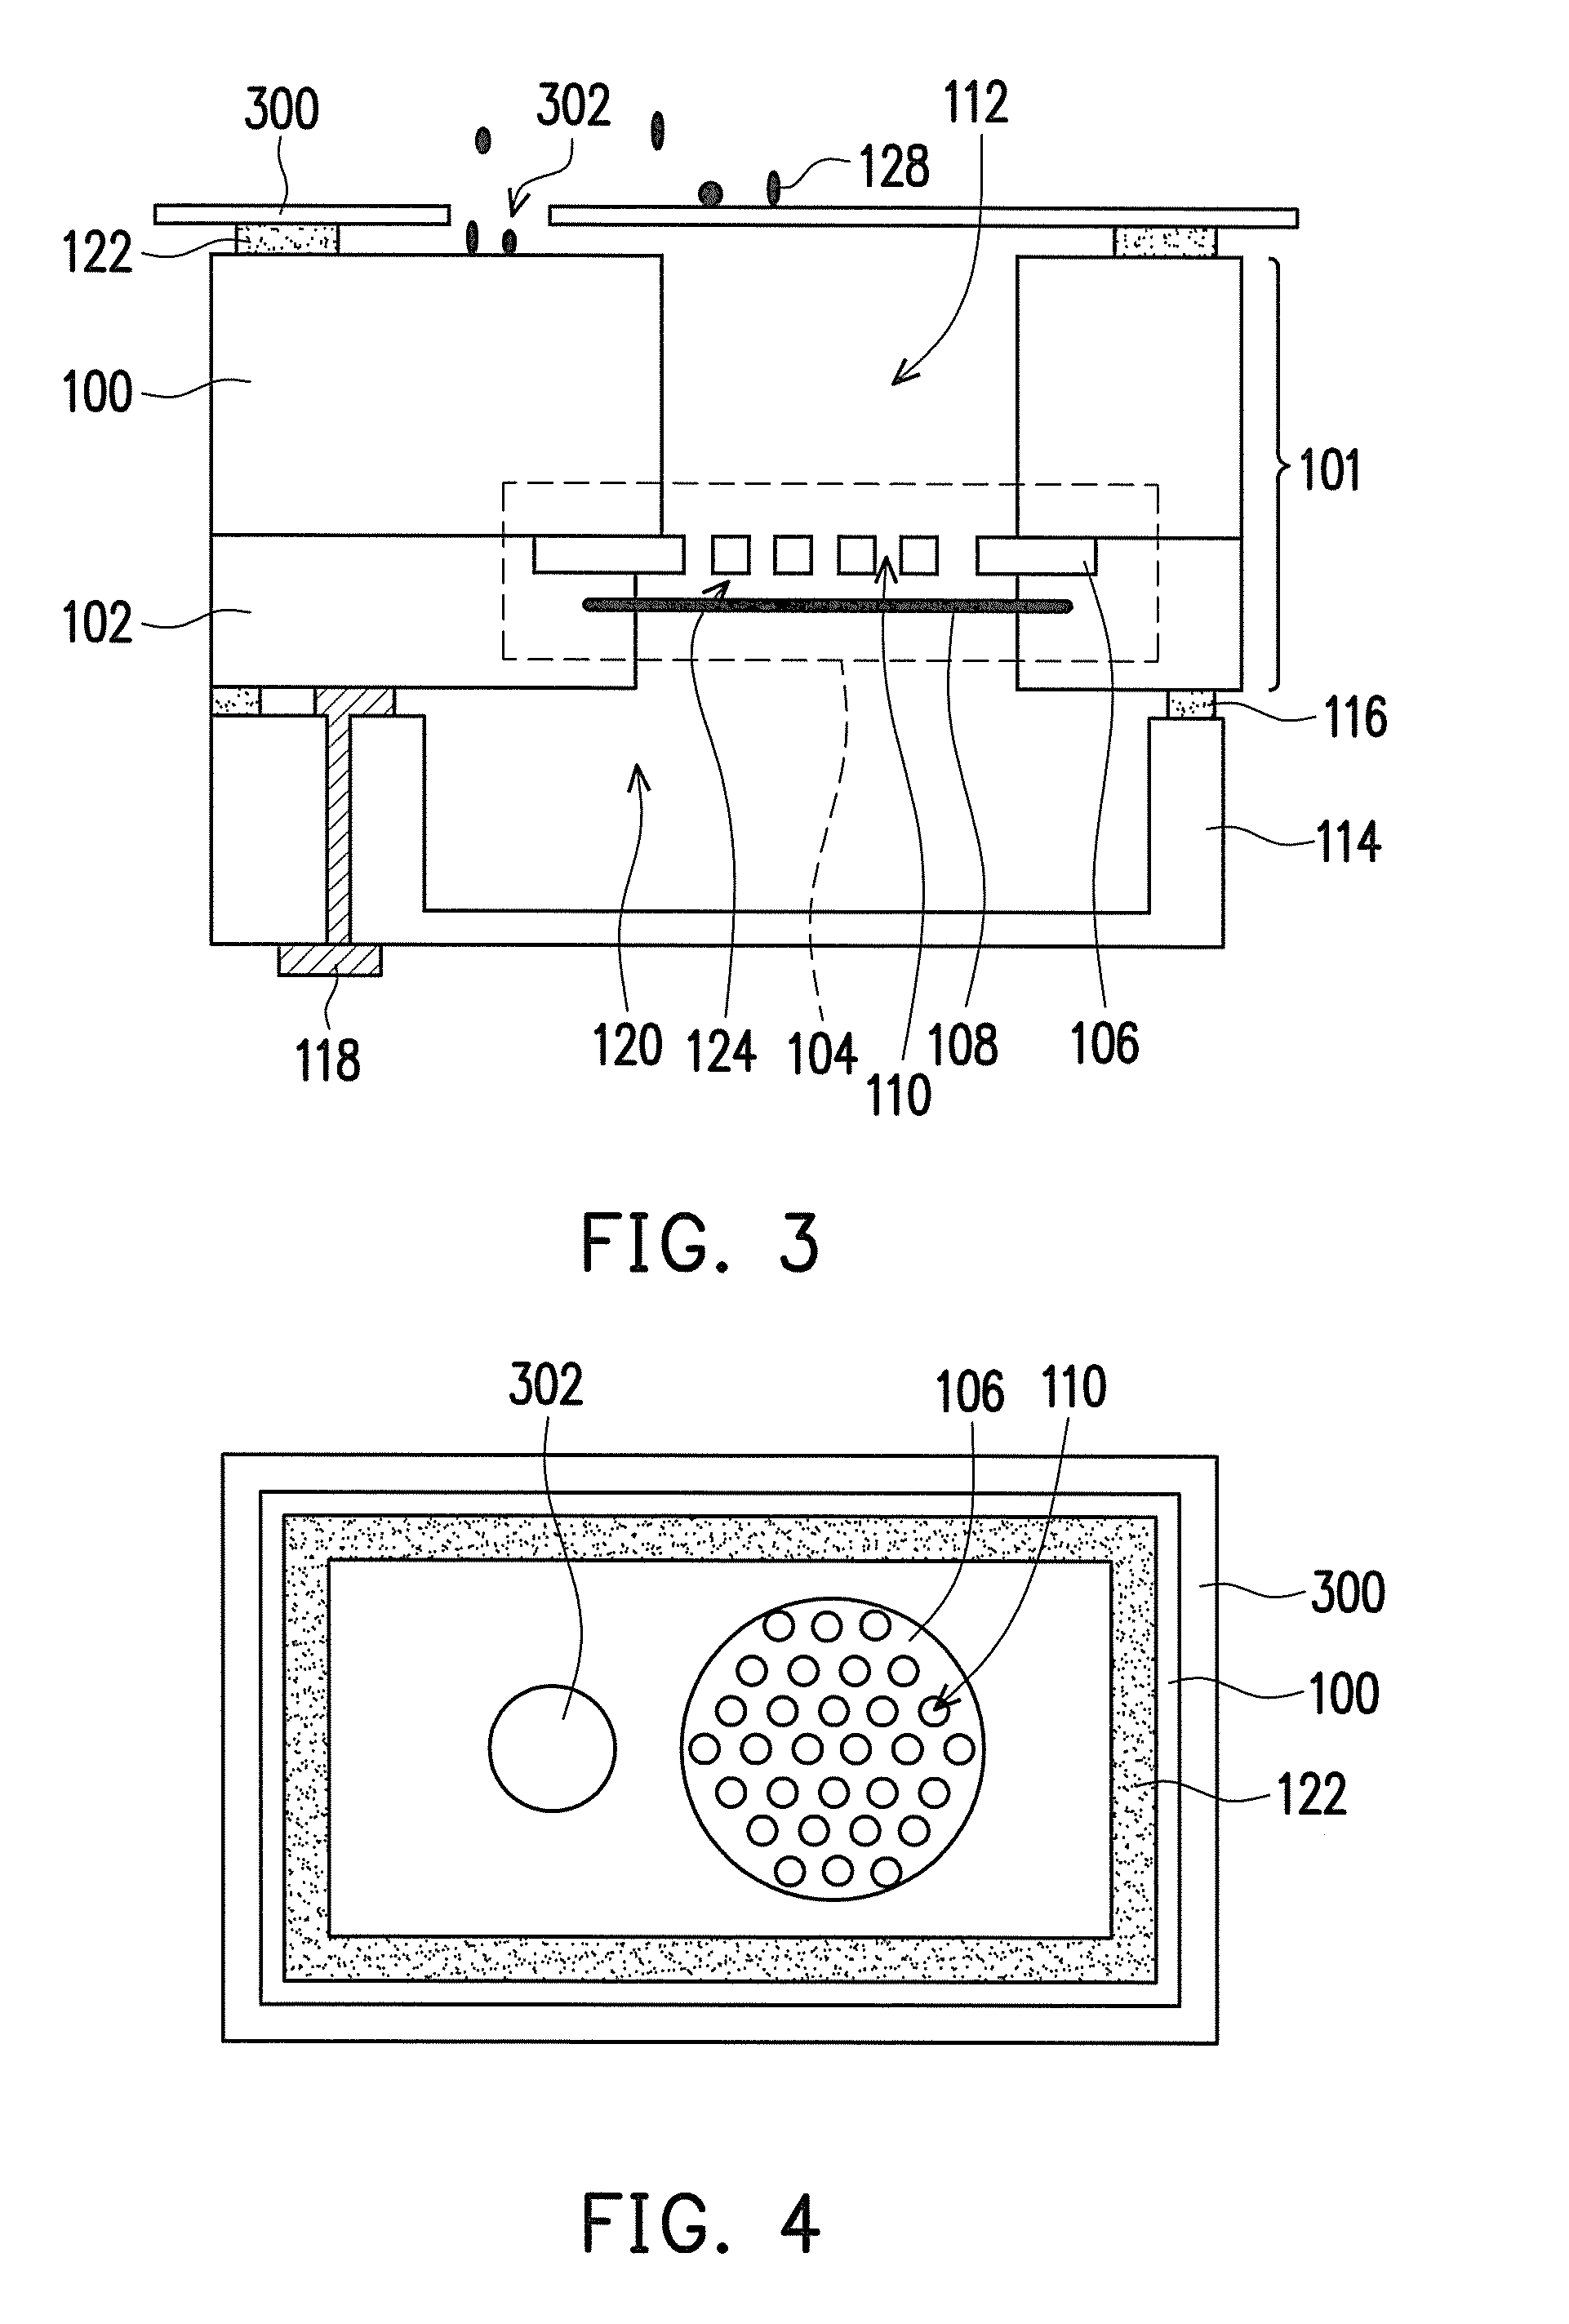 Micro-electrical-mechanical system (MEMS) microphone